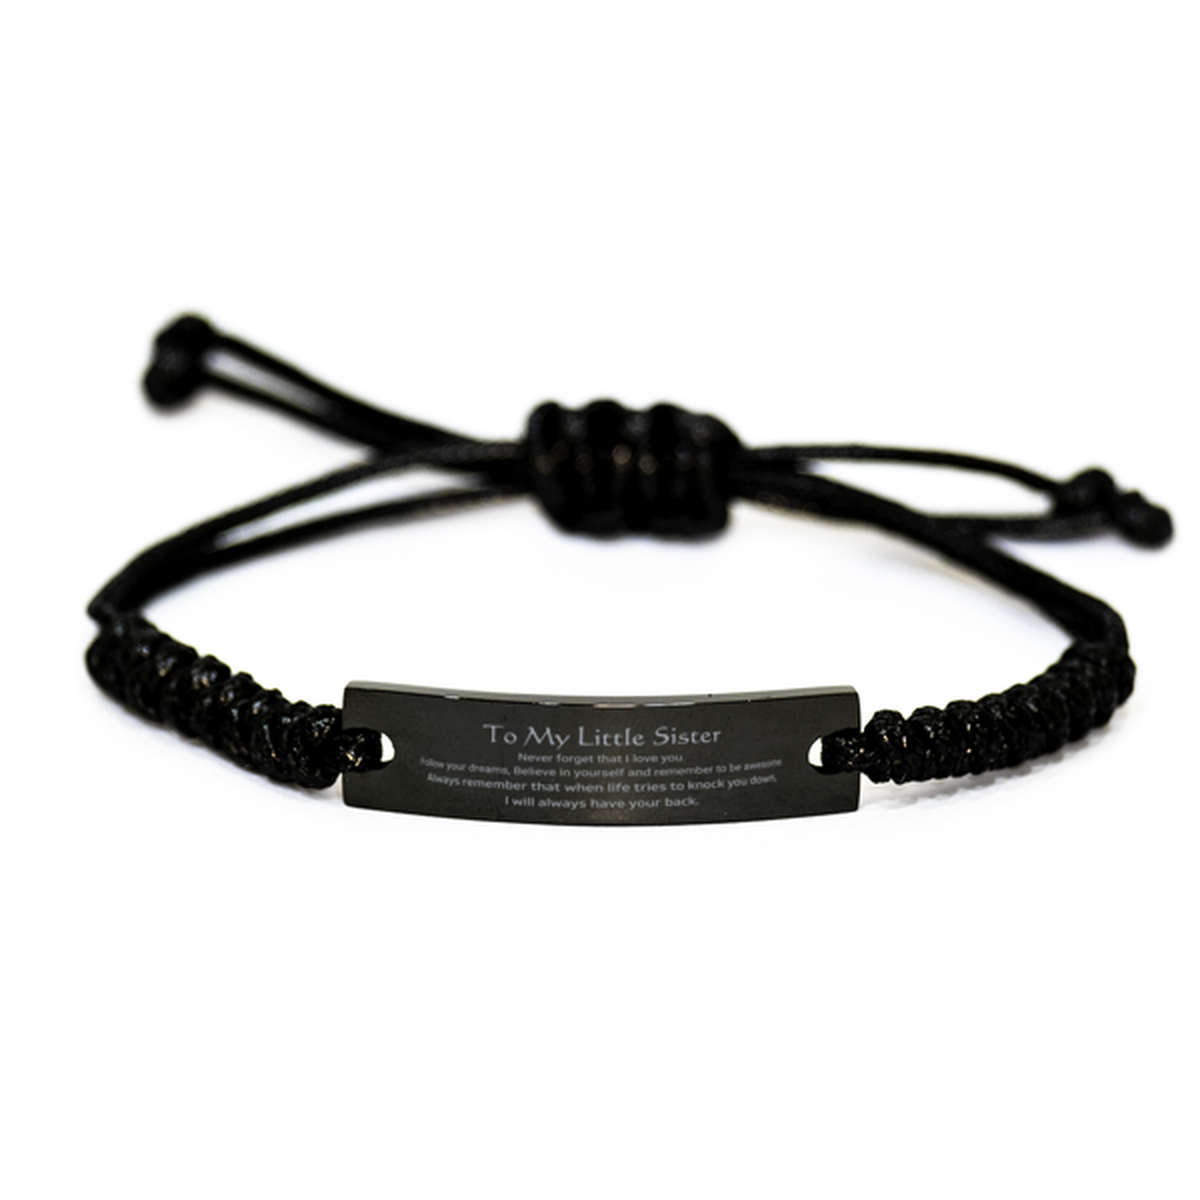 Inspirational Gifts for Little Sister, Follow your dreams, Believe in yourself, Little Sister Black Rope Bracelet, Birthday Christmas Unique Gifts For Little Sister